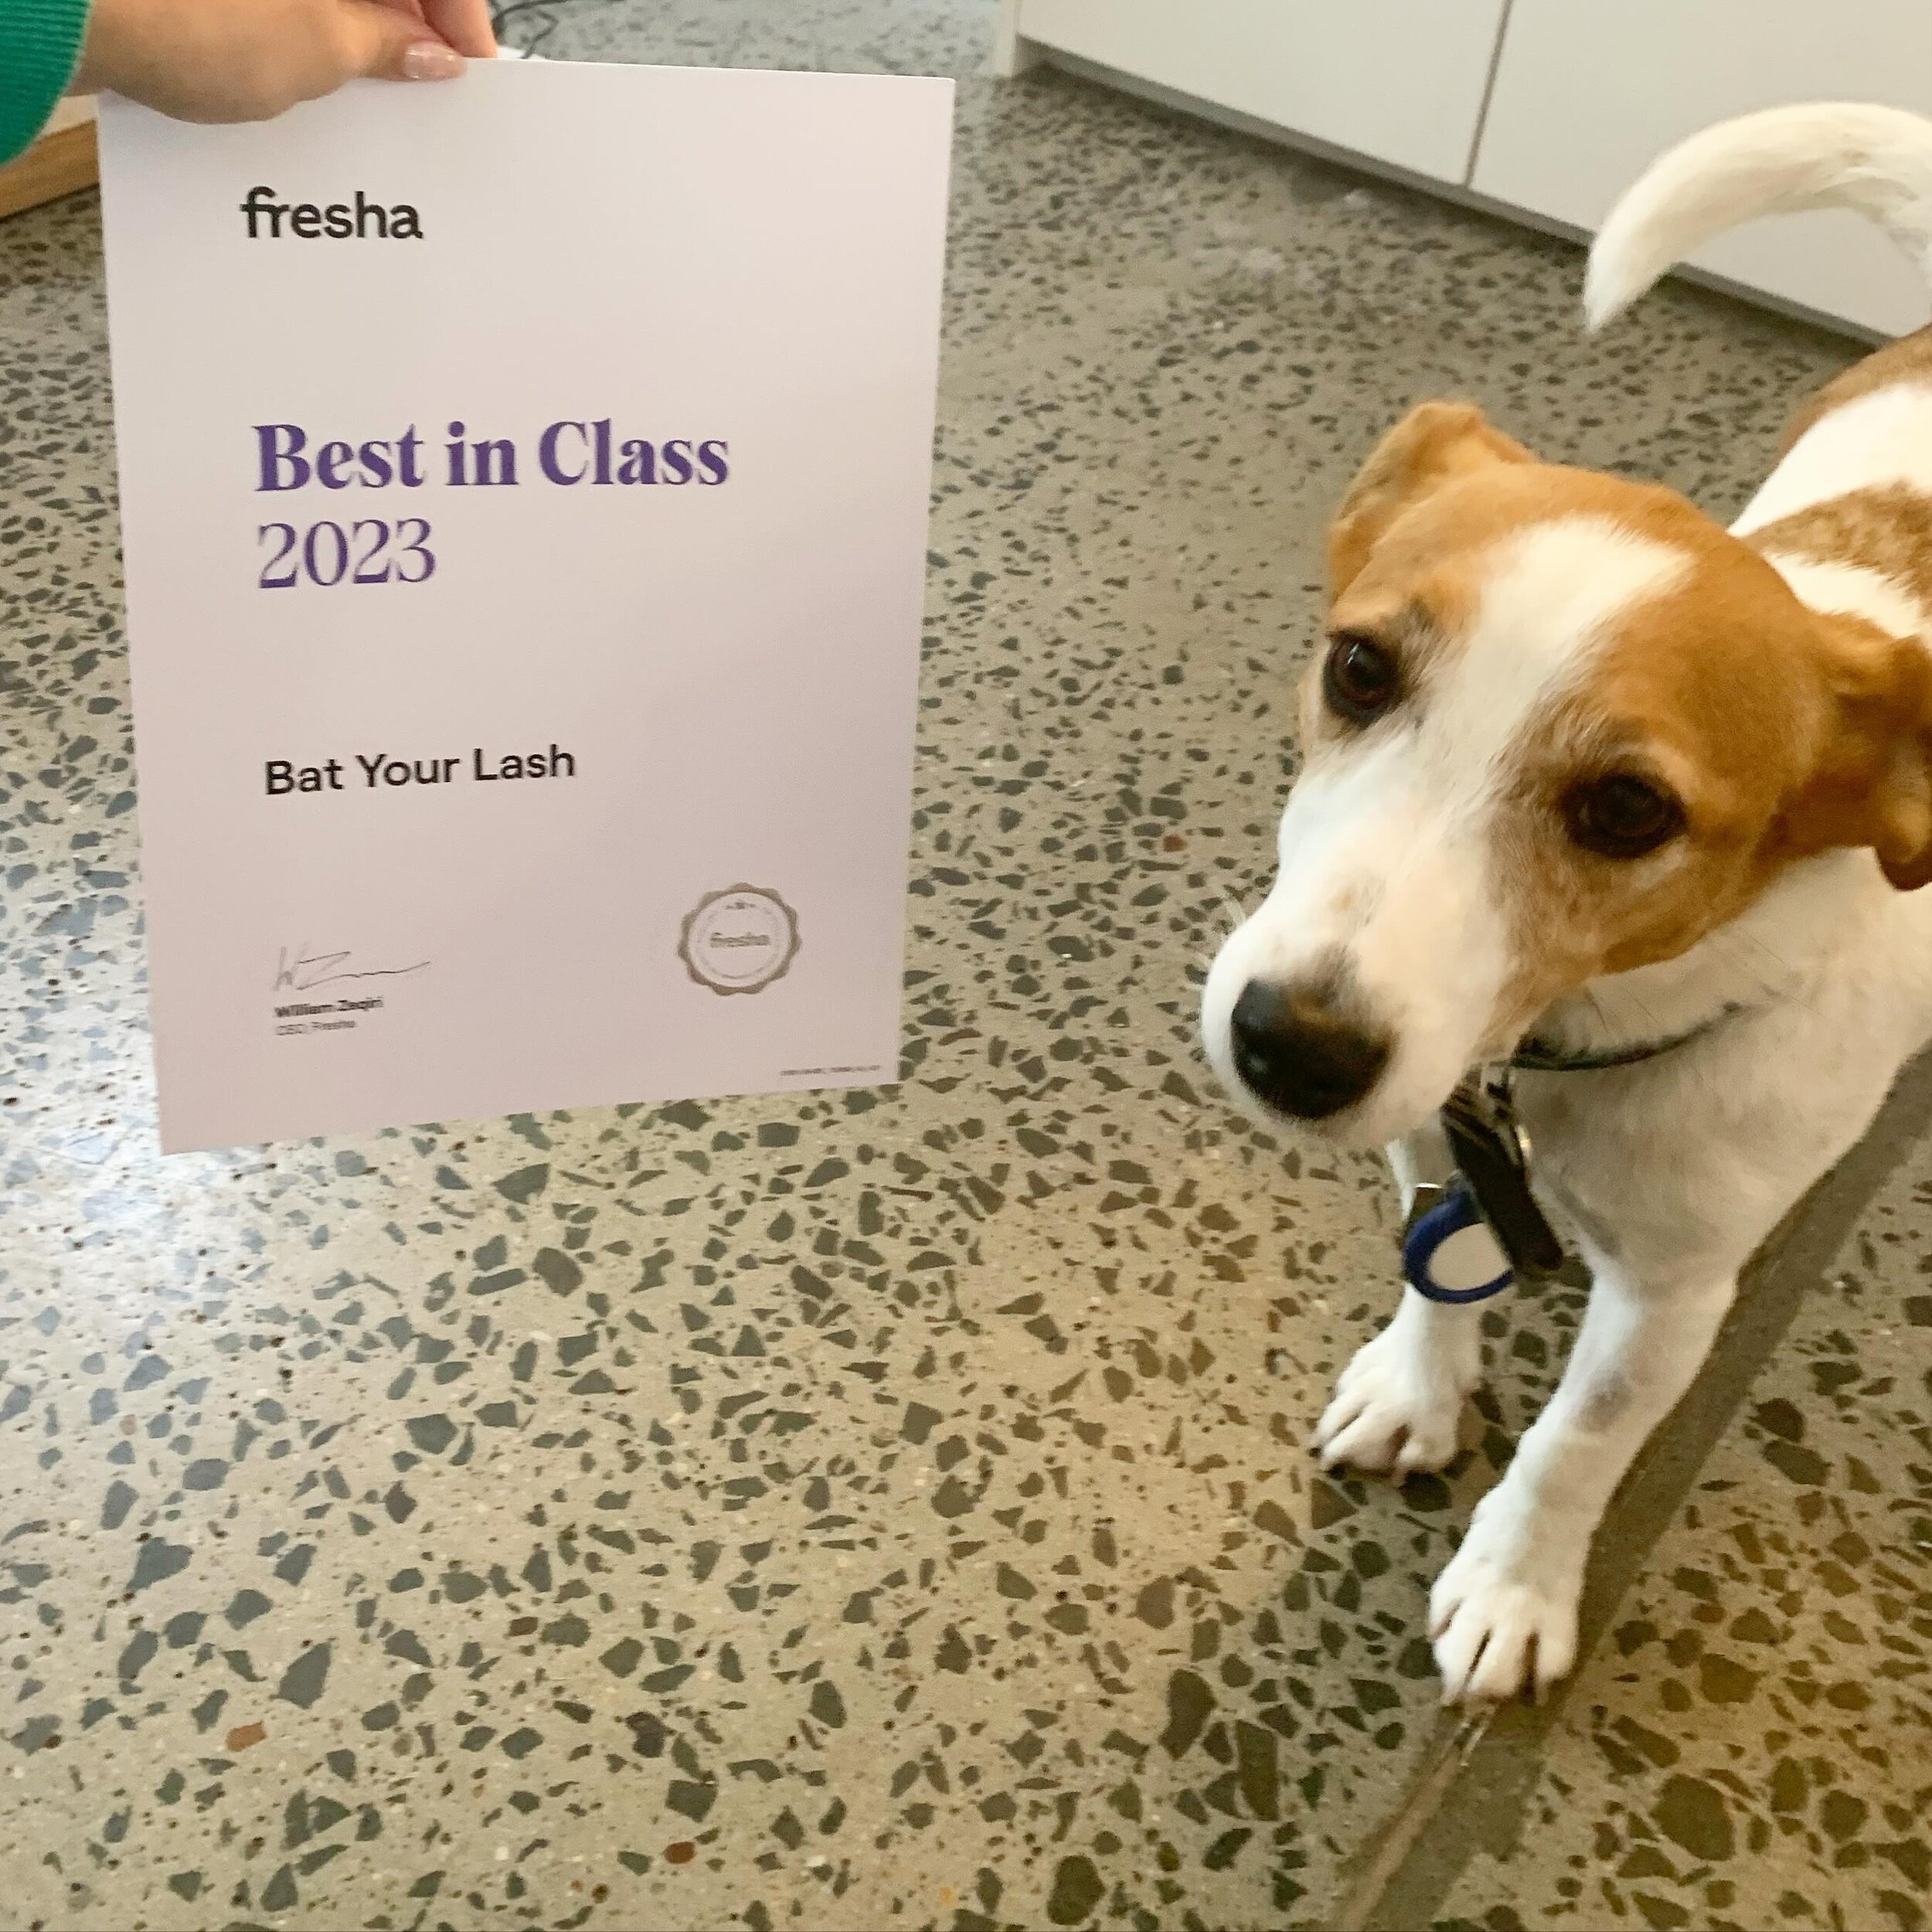 Thank you @fresha for awarding us best in class for 2023 🥰